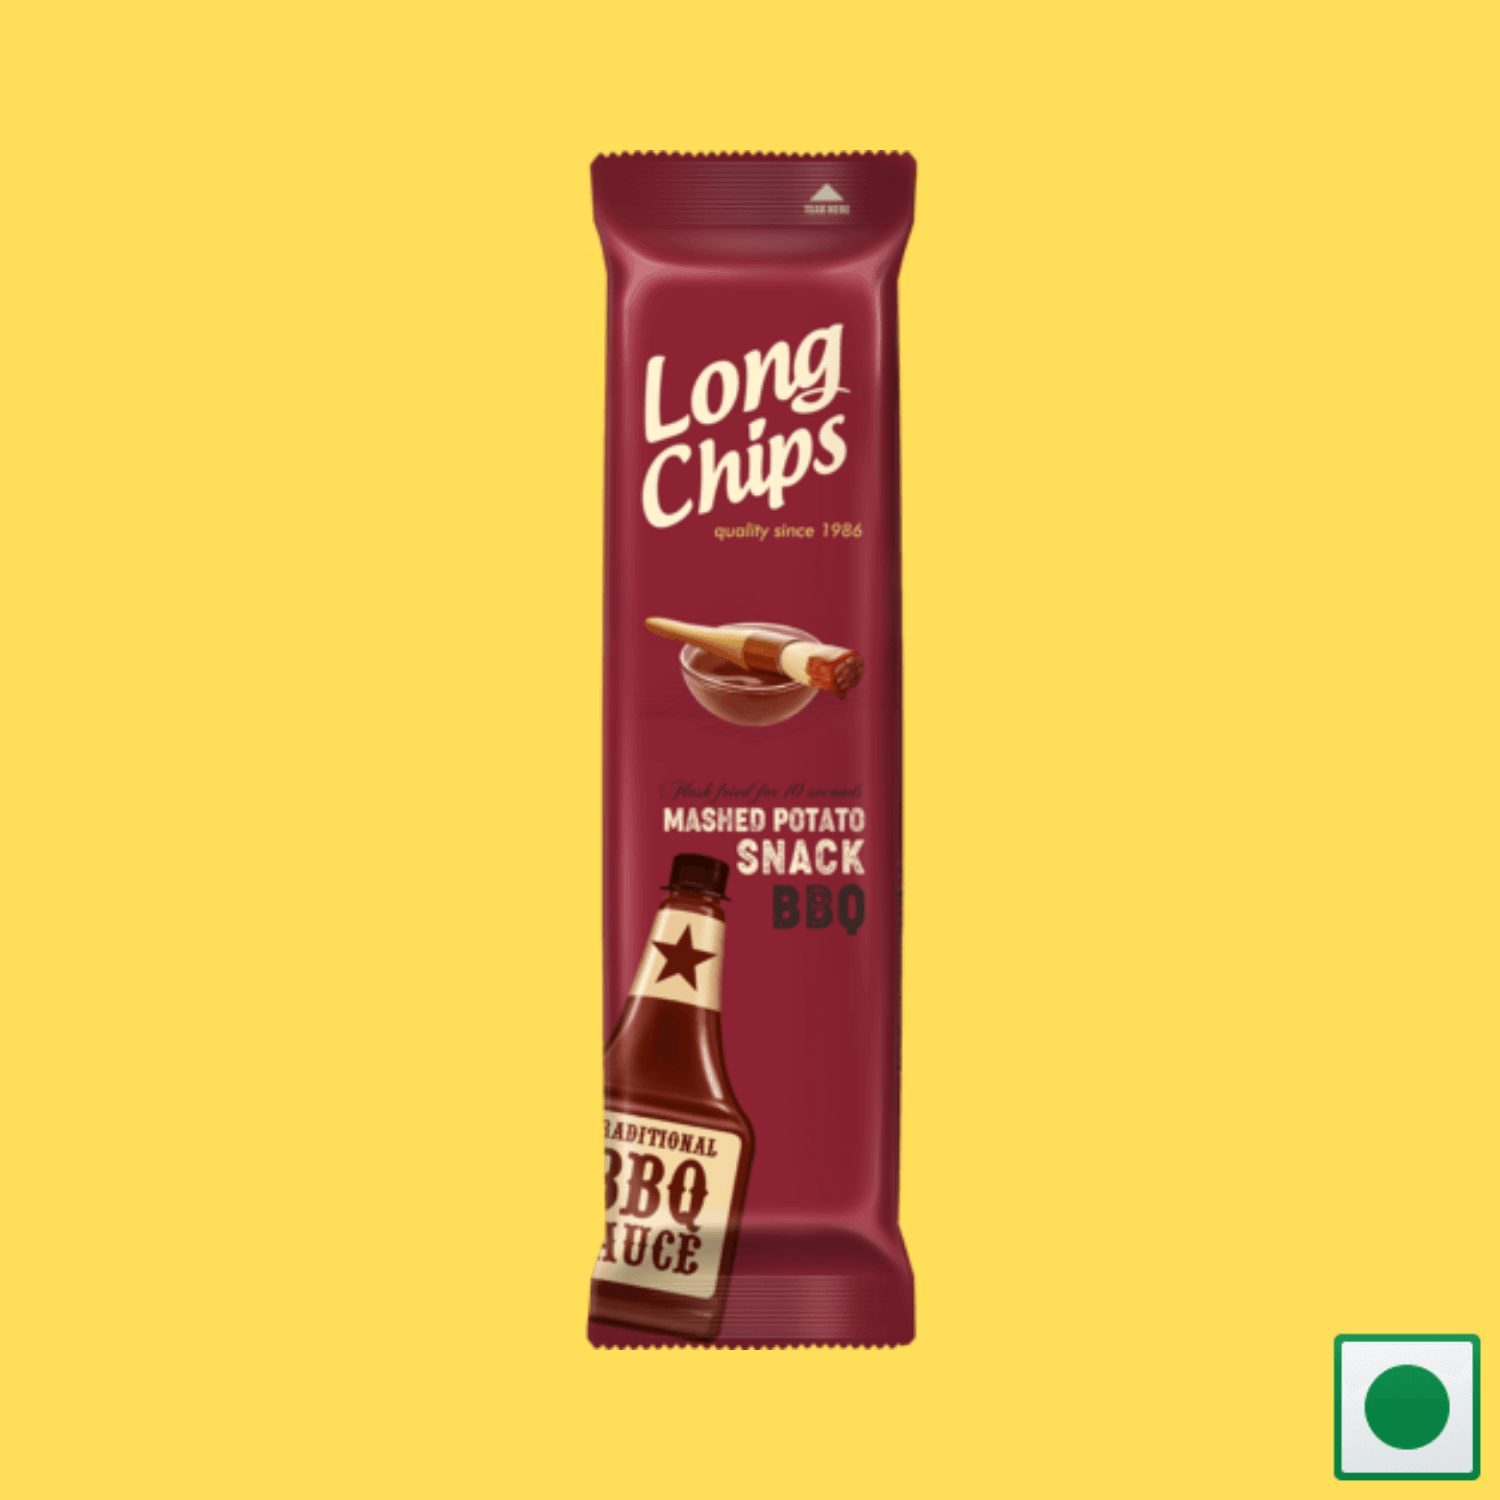 Long Chips Mashed Potato Snack BBQ Flavoured, 75g (Imported) - Super 7 Mart